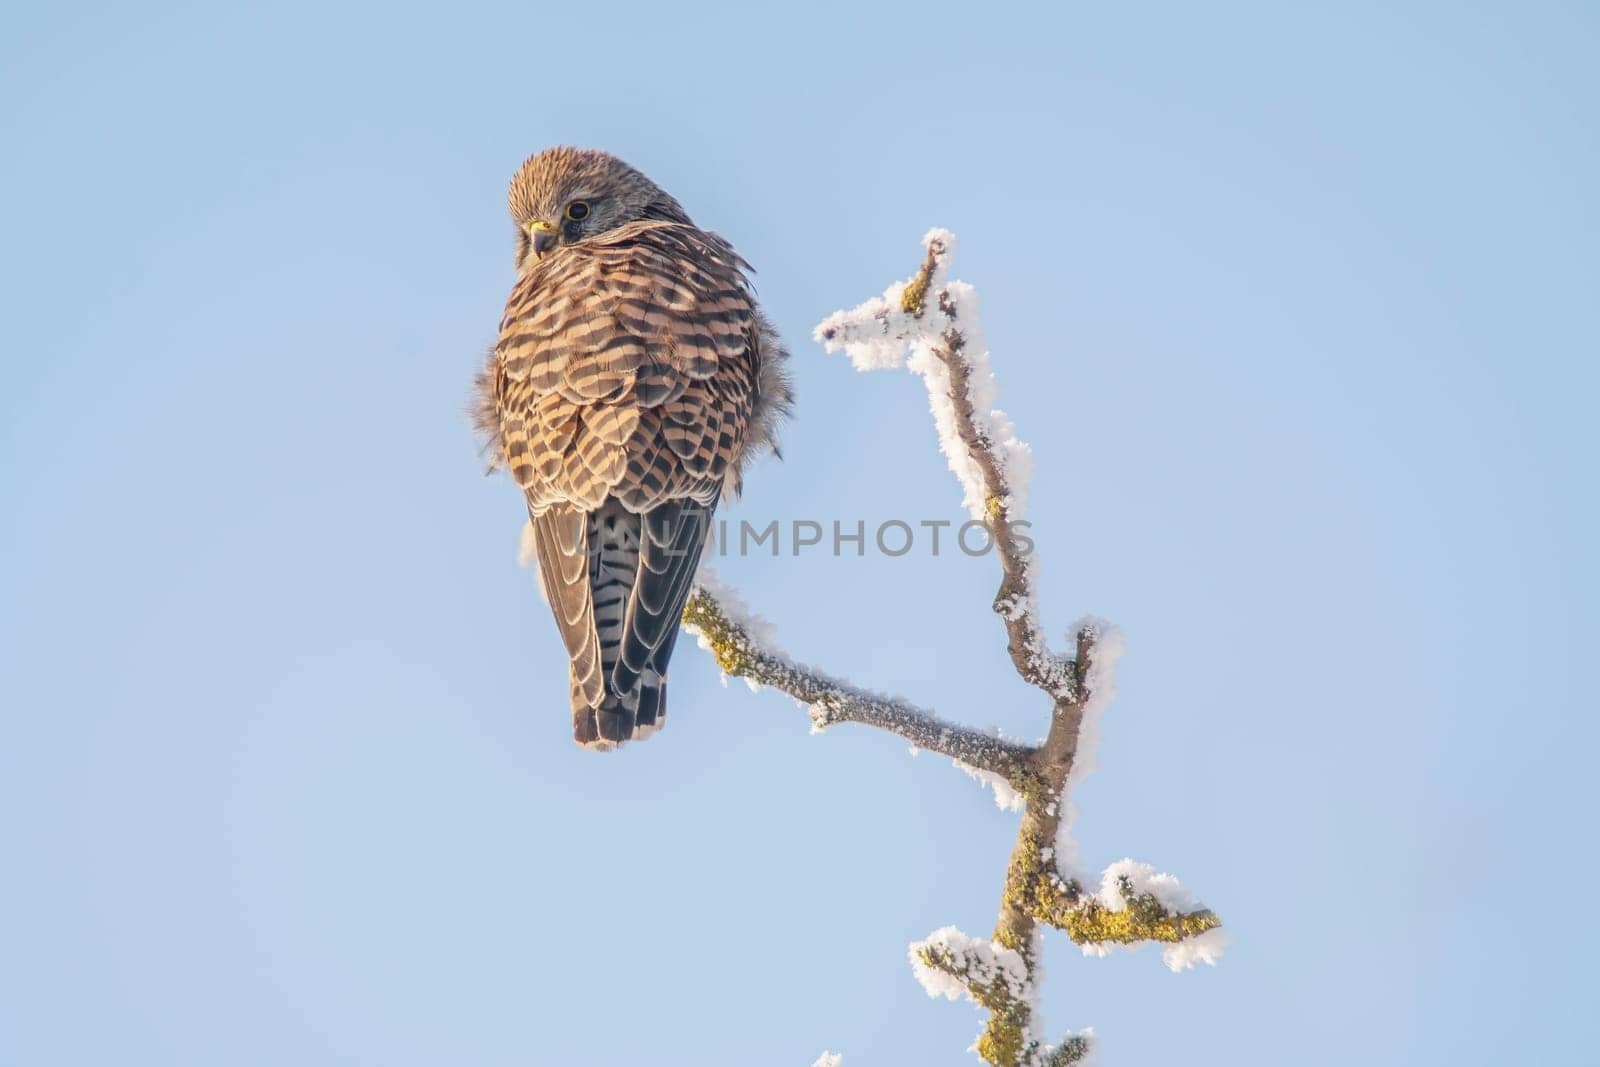 a kestrel perches on a snowy branch on a tree in winter